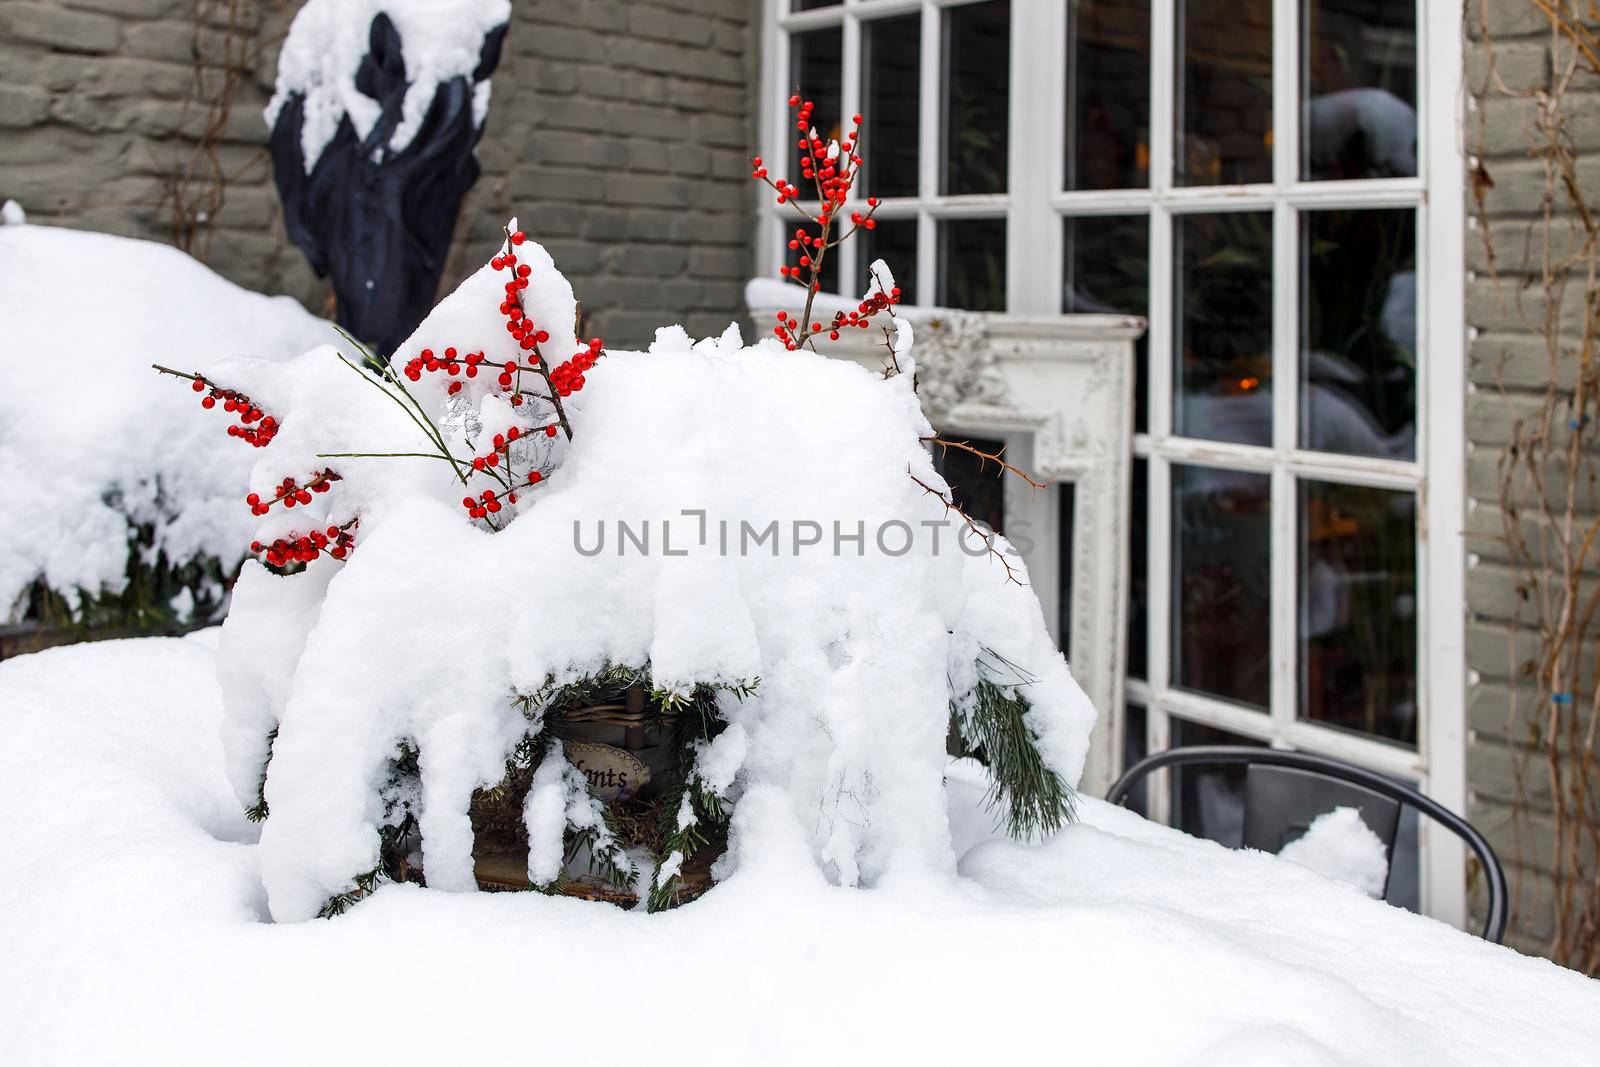 Snow-covered veranda, a table with a dried bouquet of branches with viburnum berries